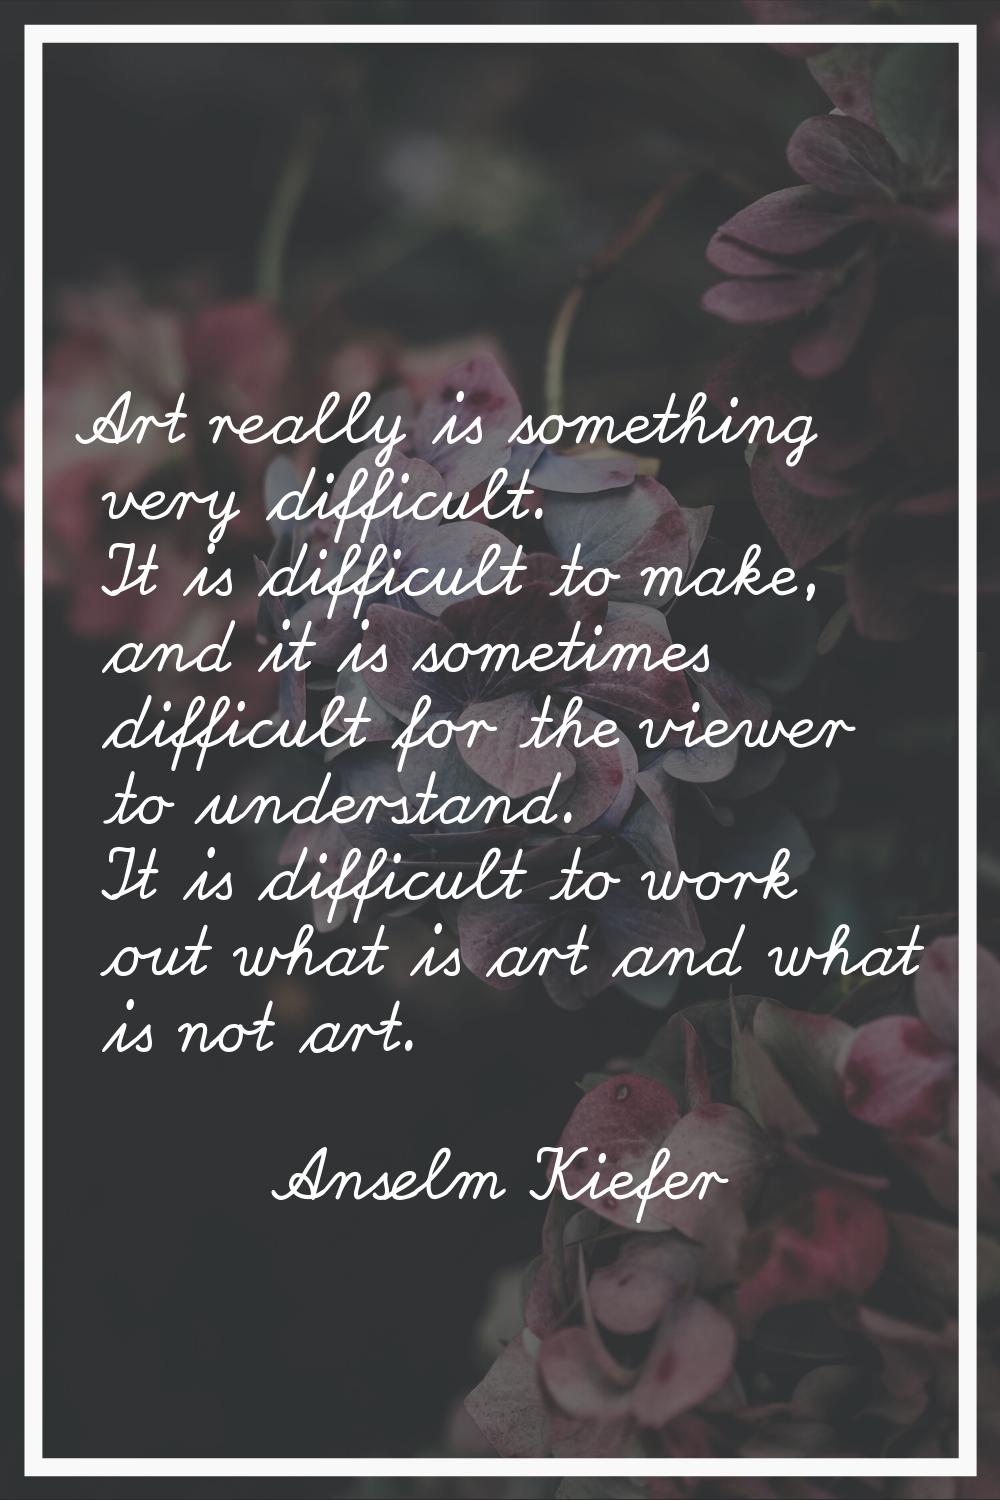 Art really is something very difficult. It is difficult to make, and it is sometimes difficult for 